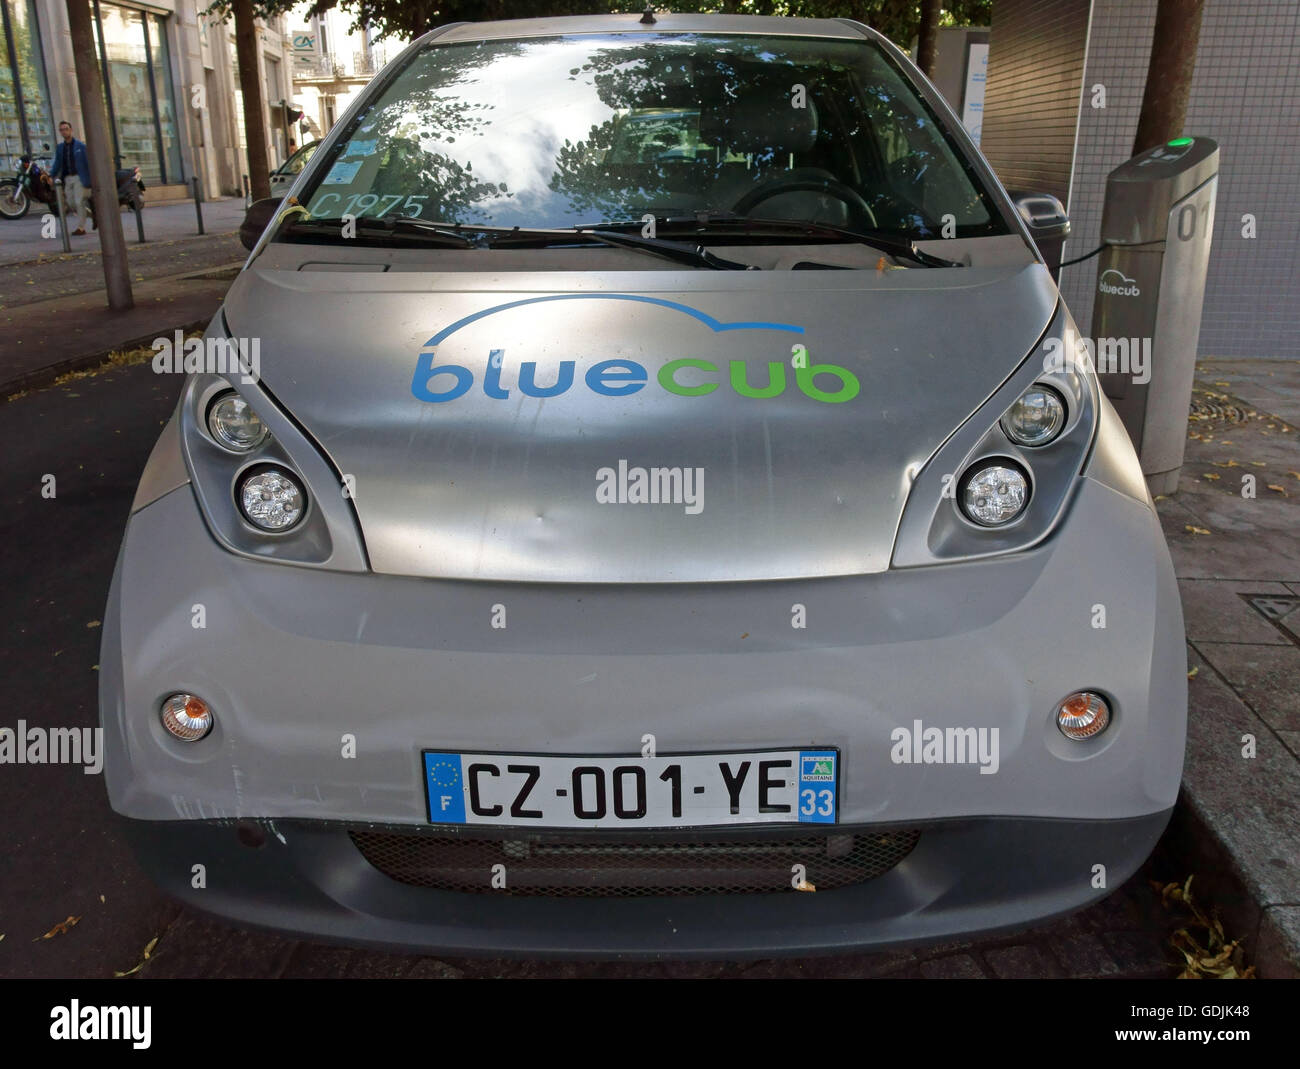 Electric rental car at recharging point, Bordeaux, France Stock Photo